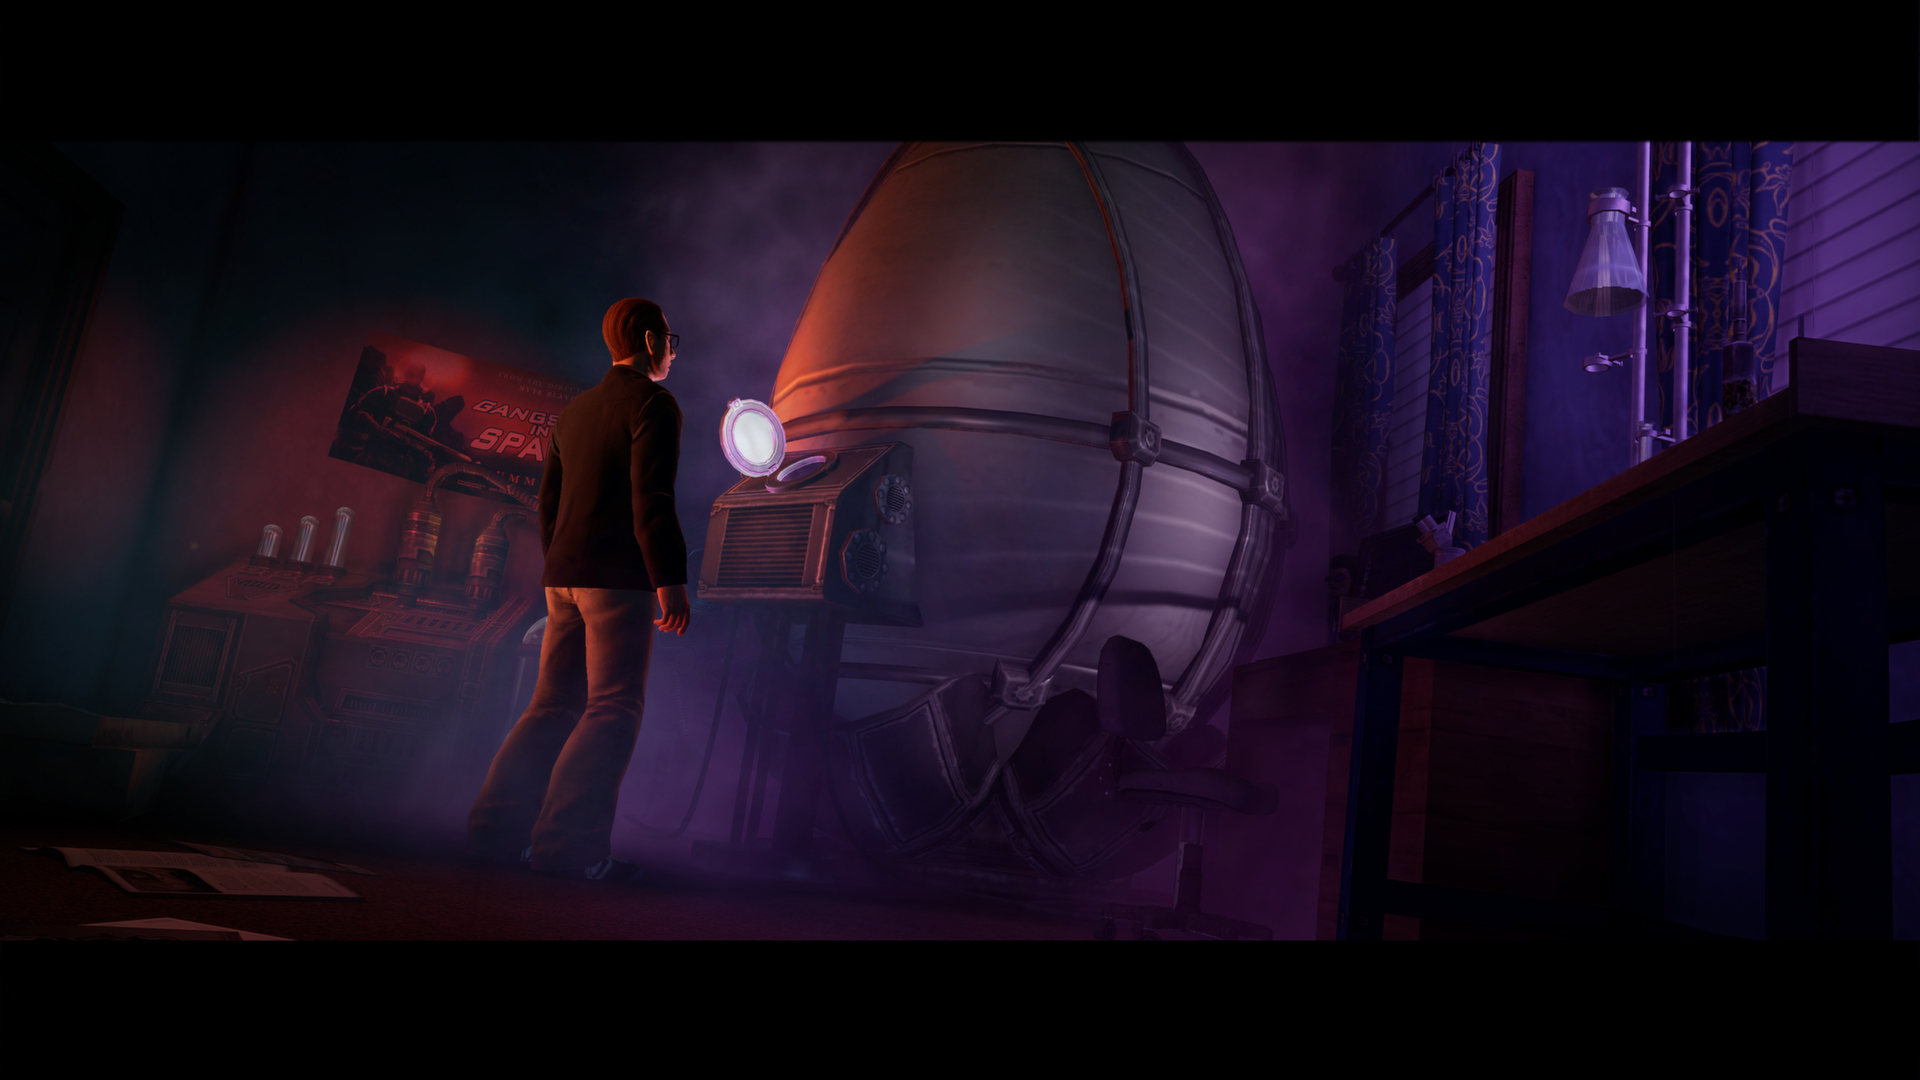 Saints Row: The Third - The Trouble with Clones DLC Featured Screenshot #1